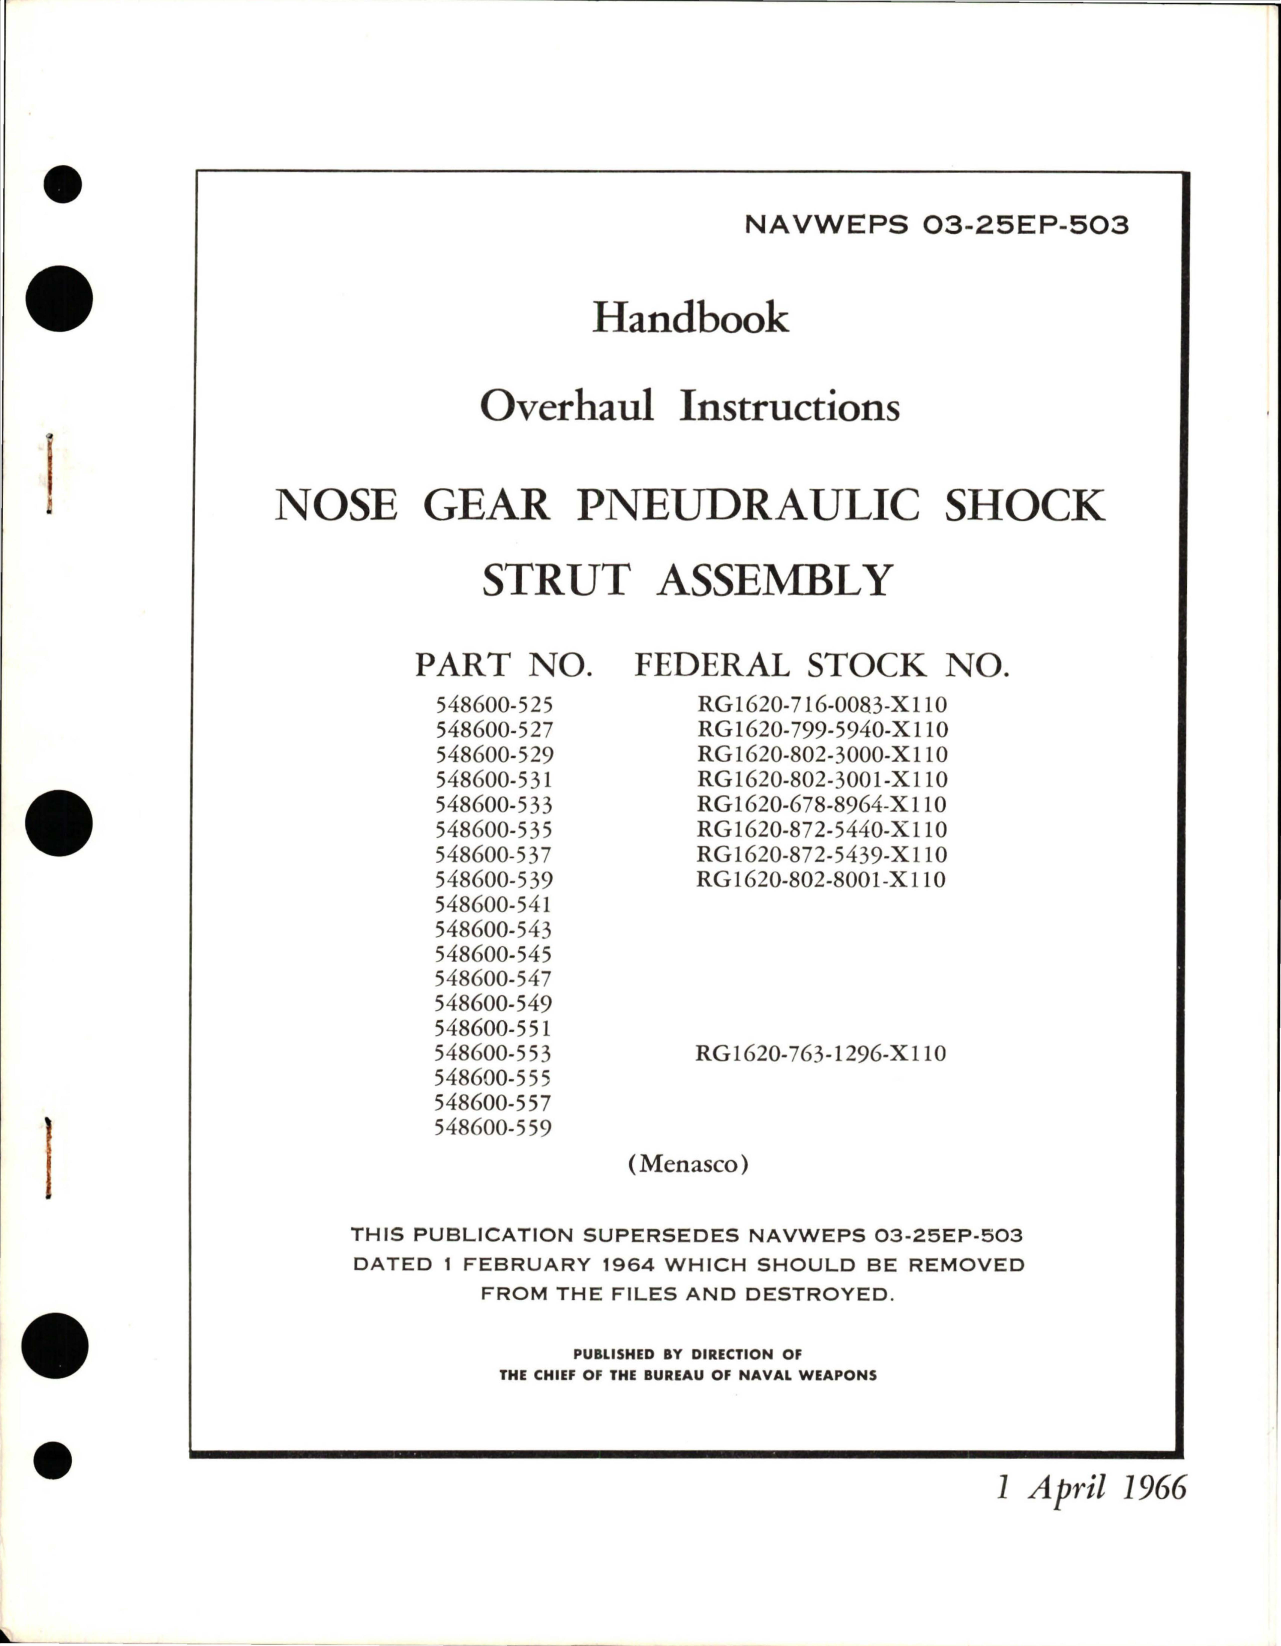 Sample page 1 from AirCorps Library document: Overhaul Instructions for Nose Gear Pneudraulic Shock Strut Assembly - Part 548600 Series